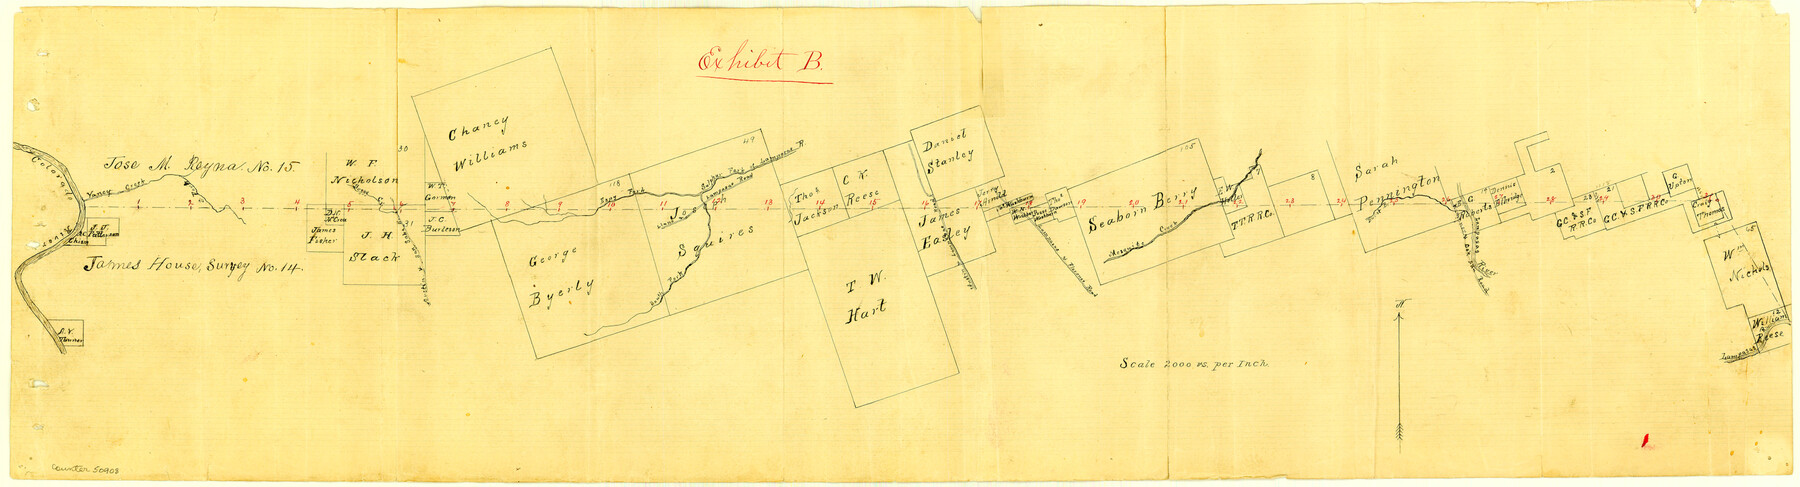 50908, Burnet County Boundary File 8, General Map Collection